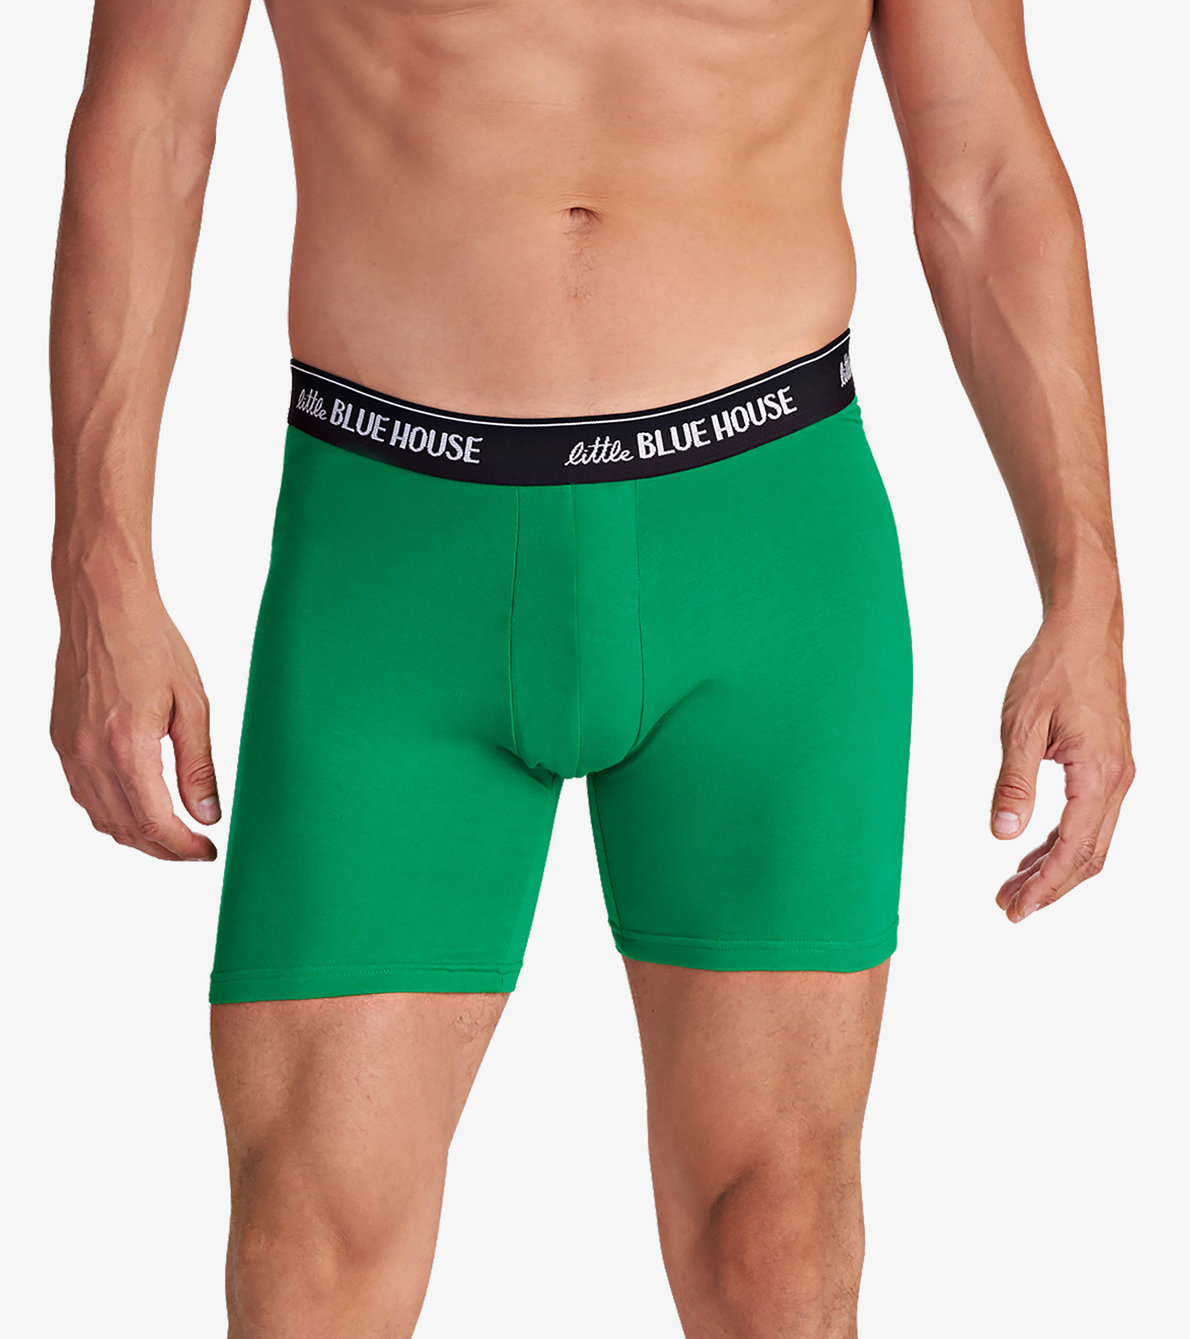 View larger image of Men's Hung with Care Boxers